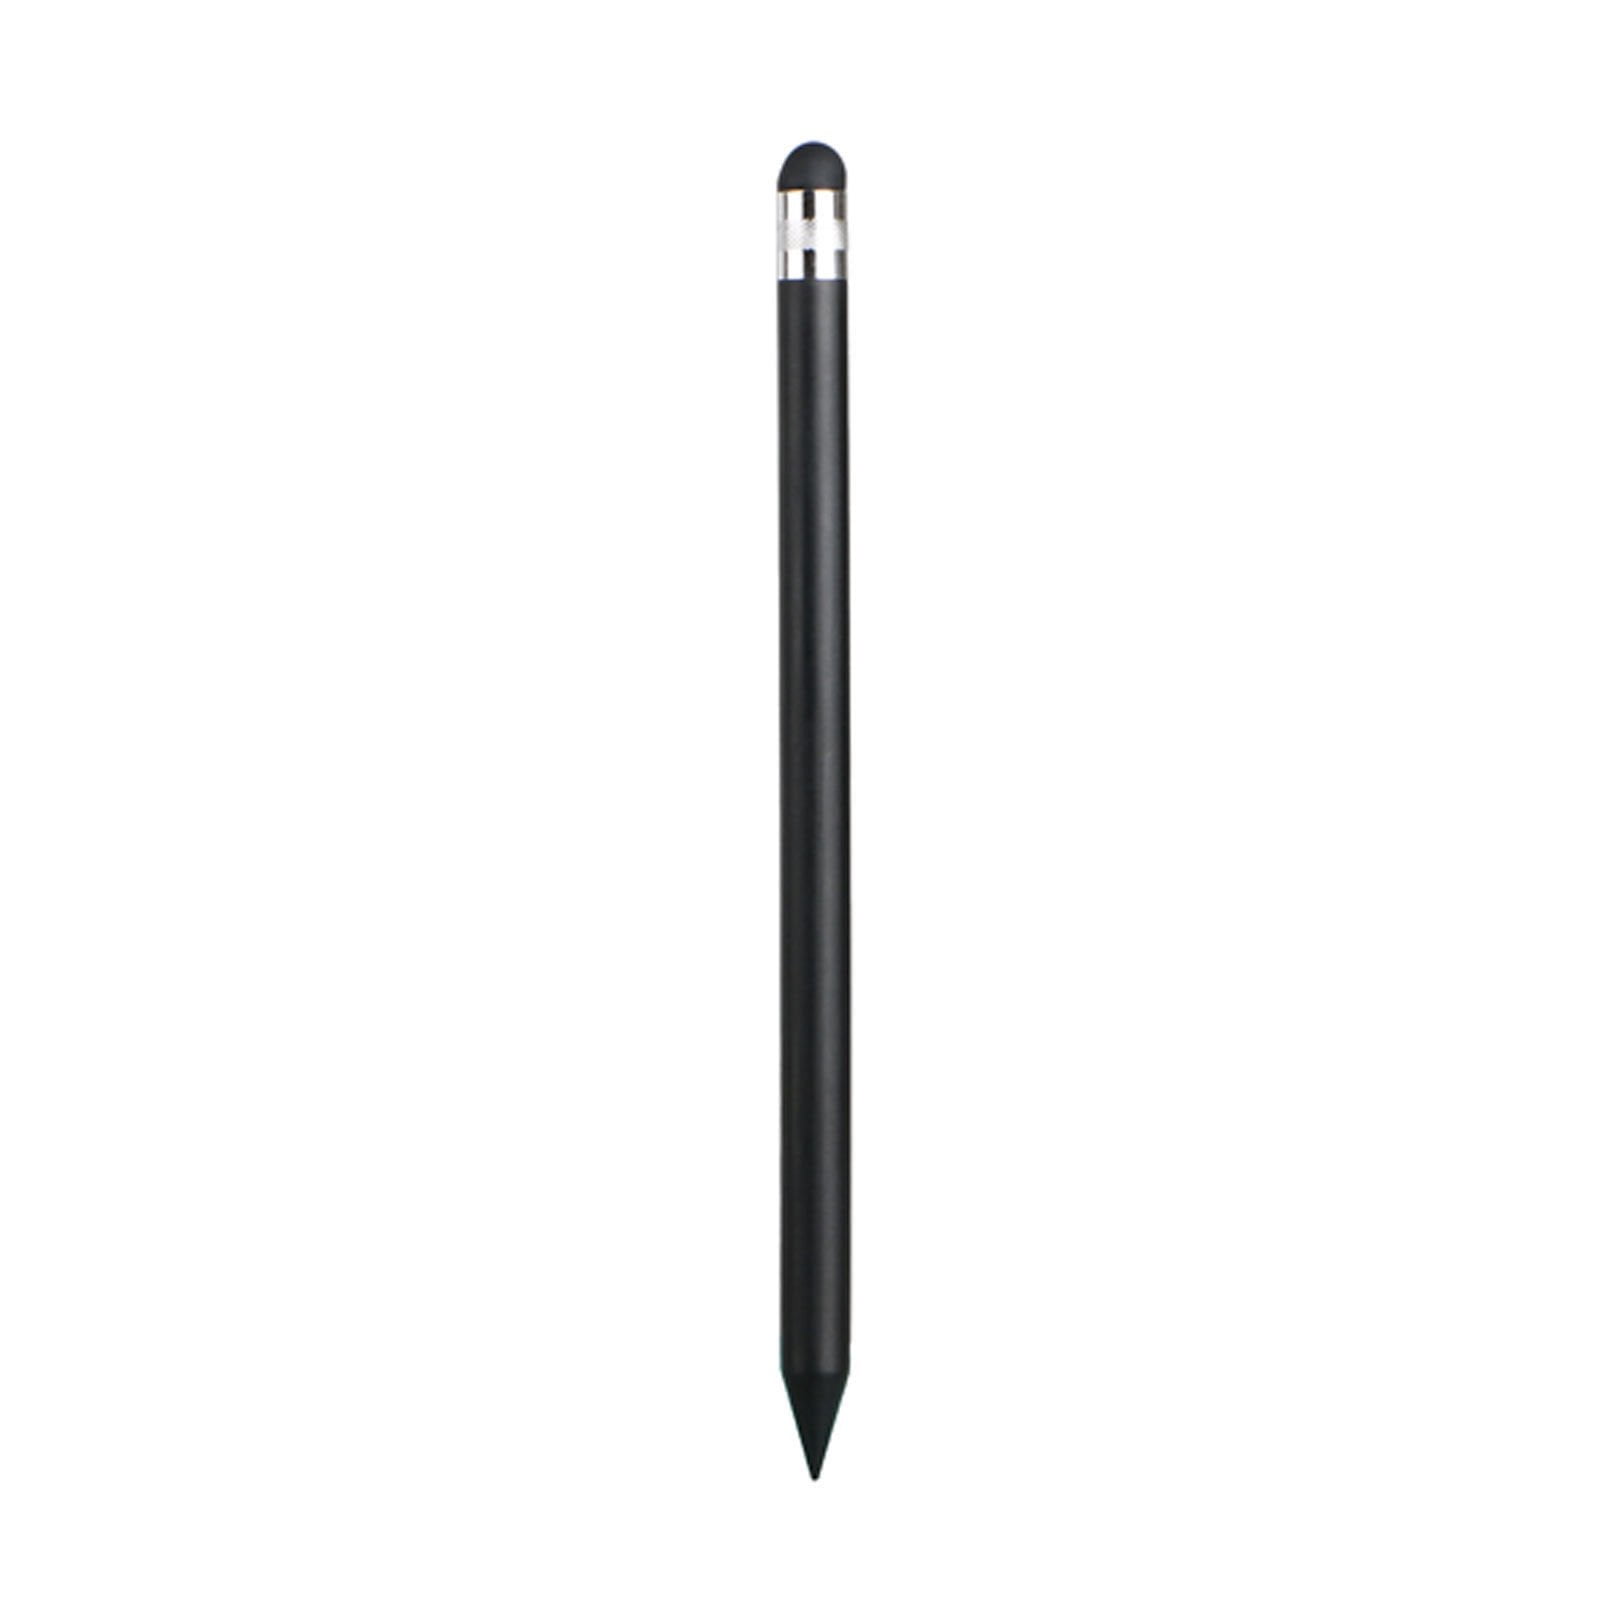 2in1 Precision Capacitive Touch Screen Stylus Pen For iPhone iPad Samsung Tablet 